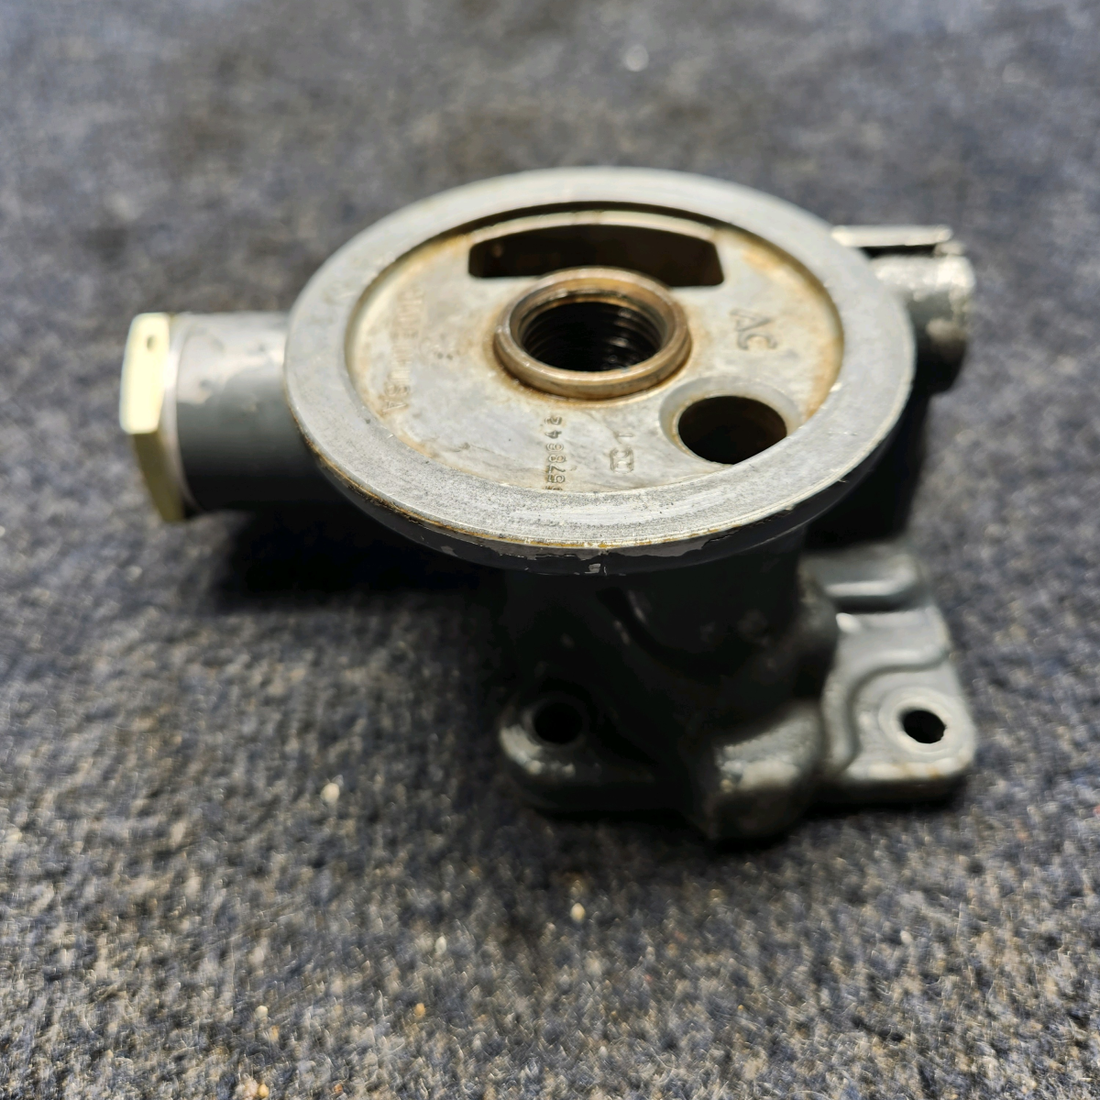 Used aircraft parts for sale, 77852 Lycoming  [part_model] PIPER PA28-140 O-320 OIL FILTER BASE ASSY / VERNATHERM VALVE